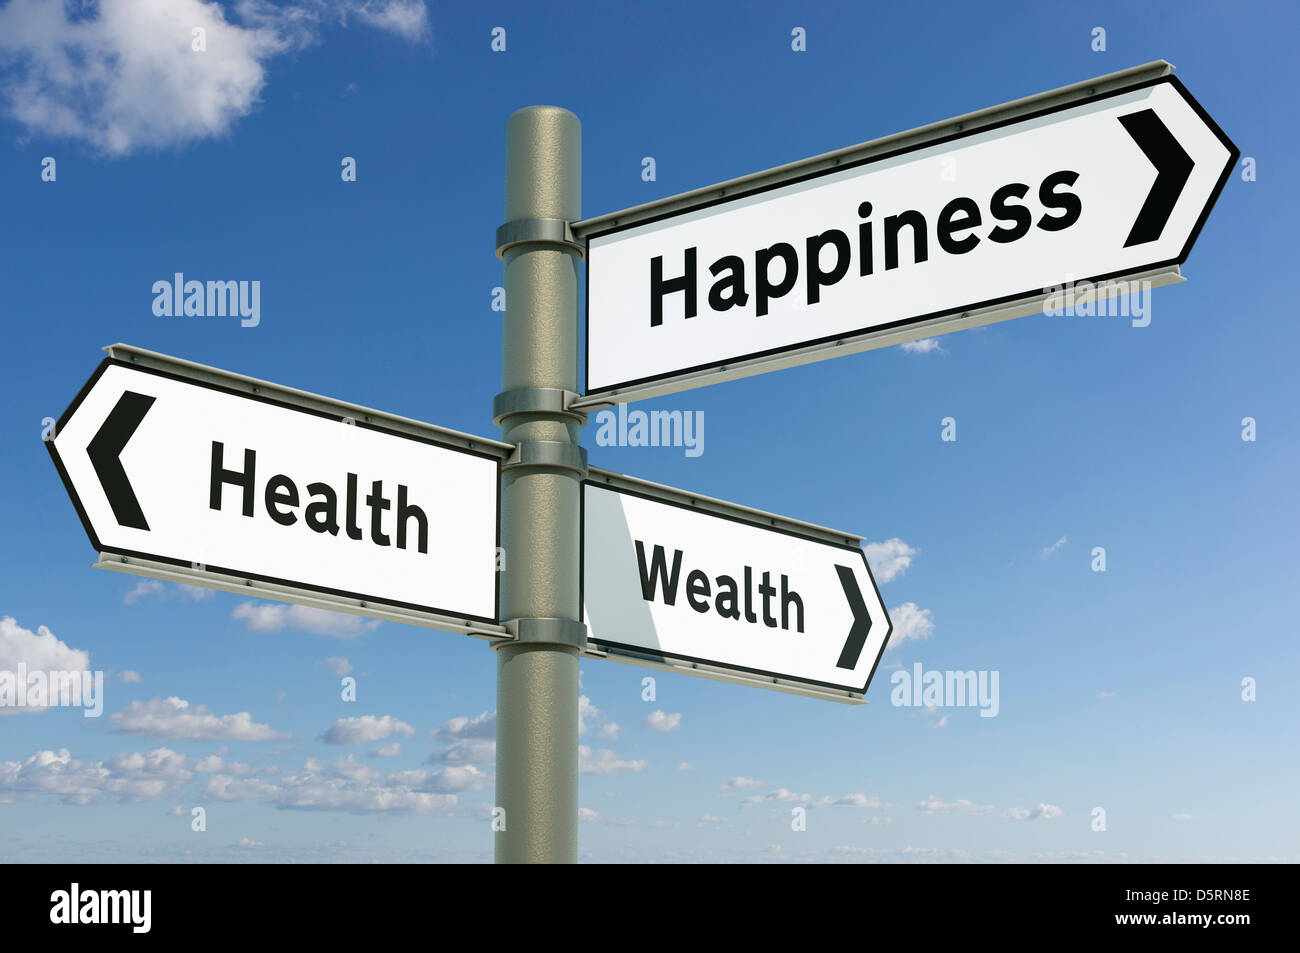 wealth and happiness